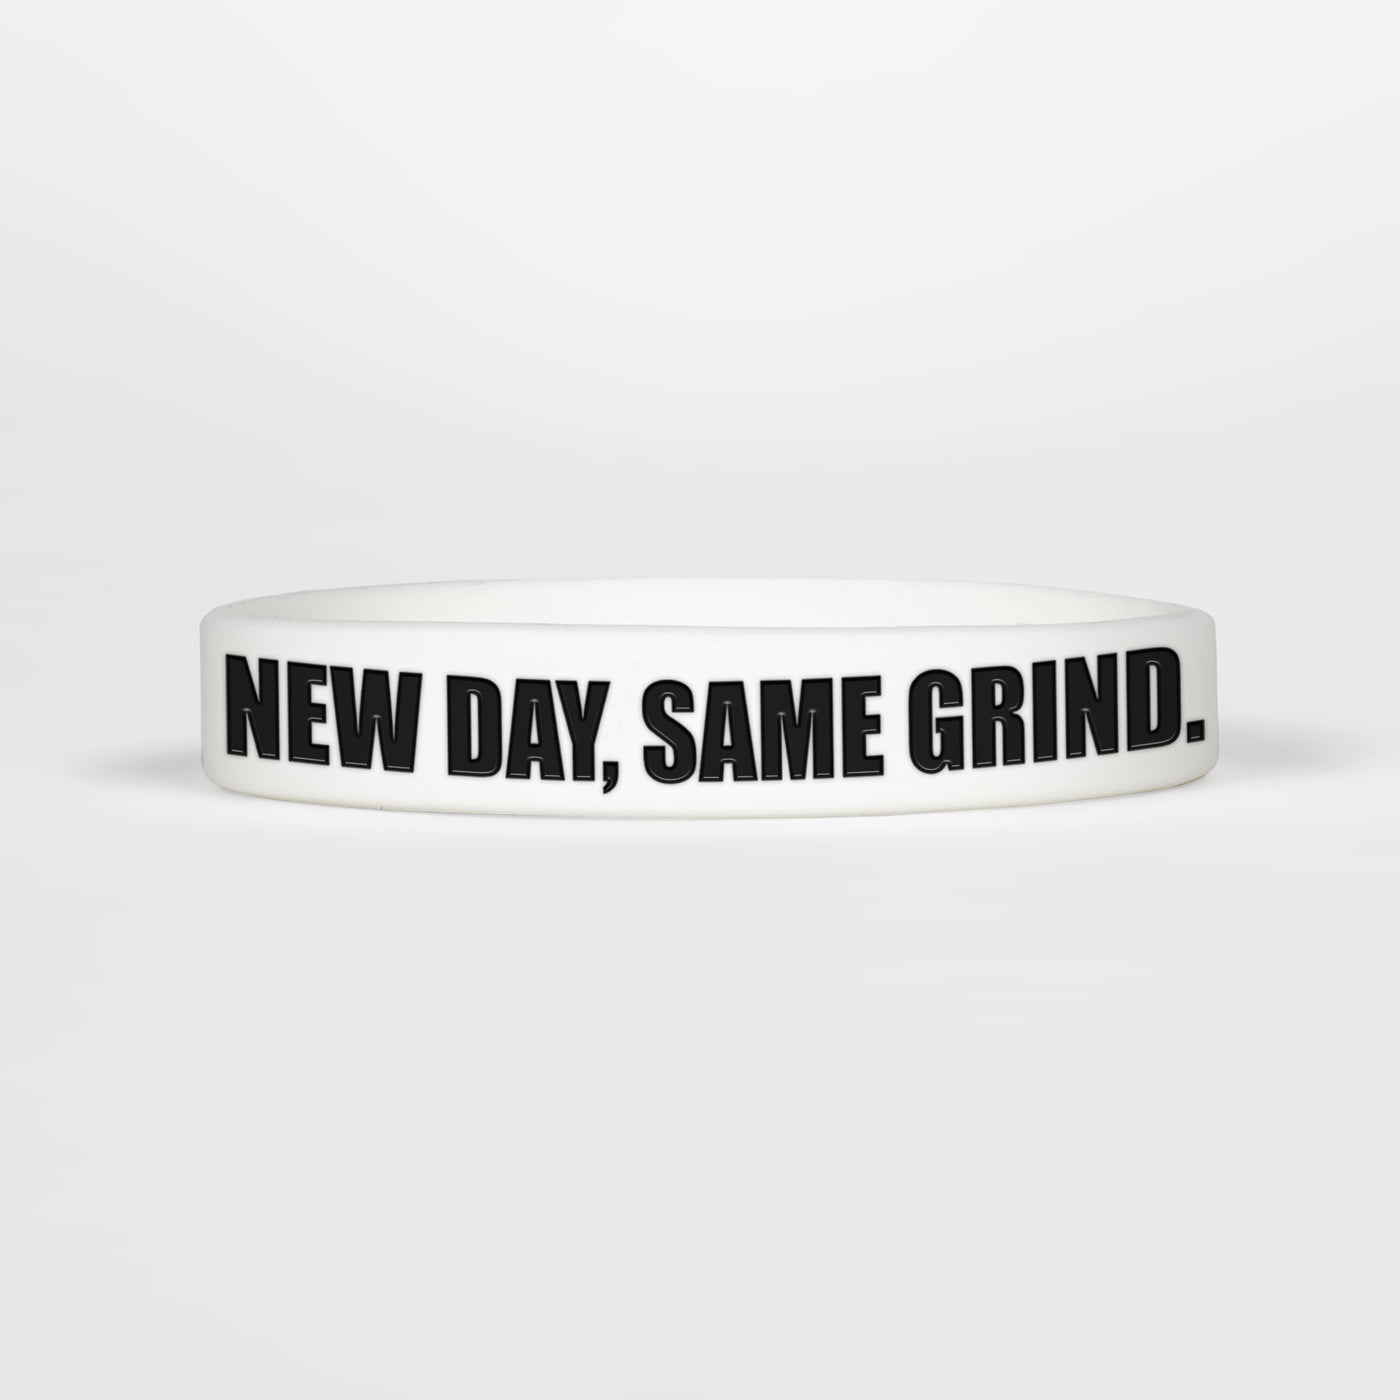 New Day, Same Grind Motivational Wristband